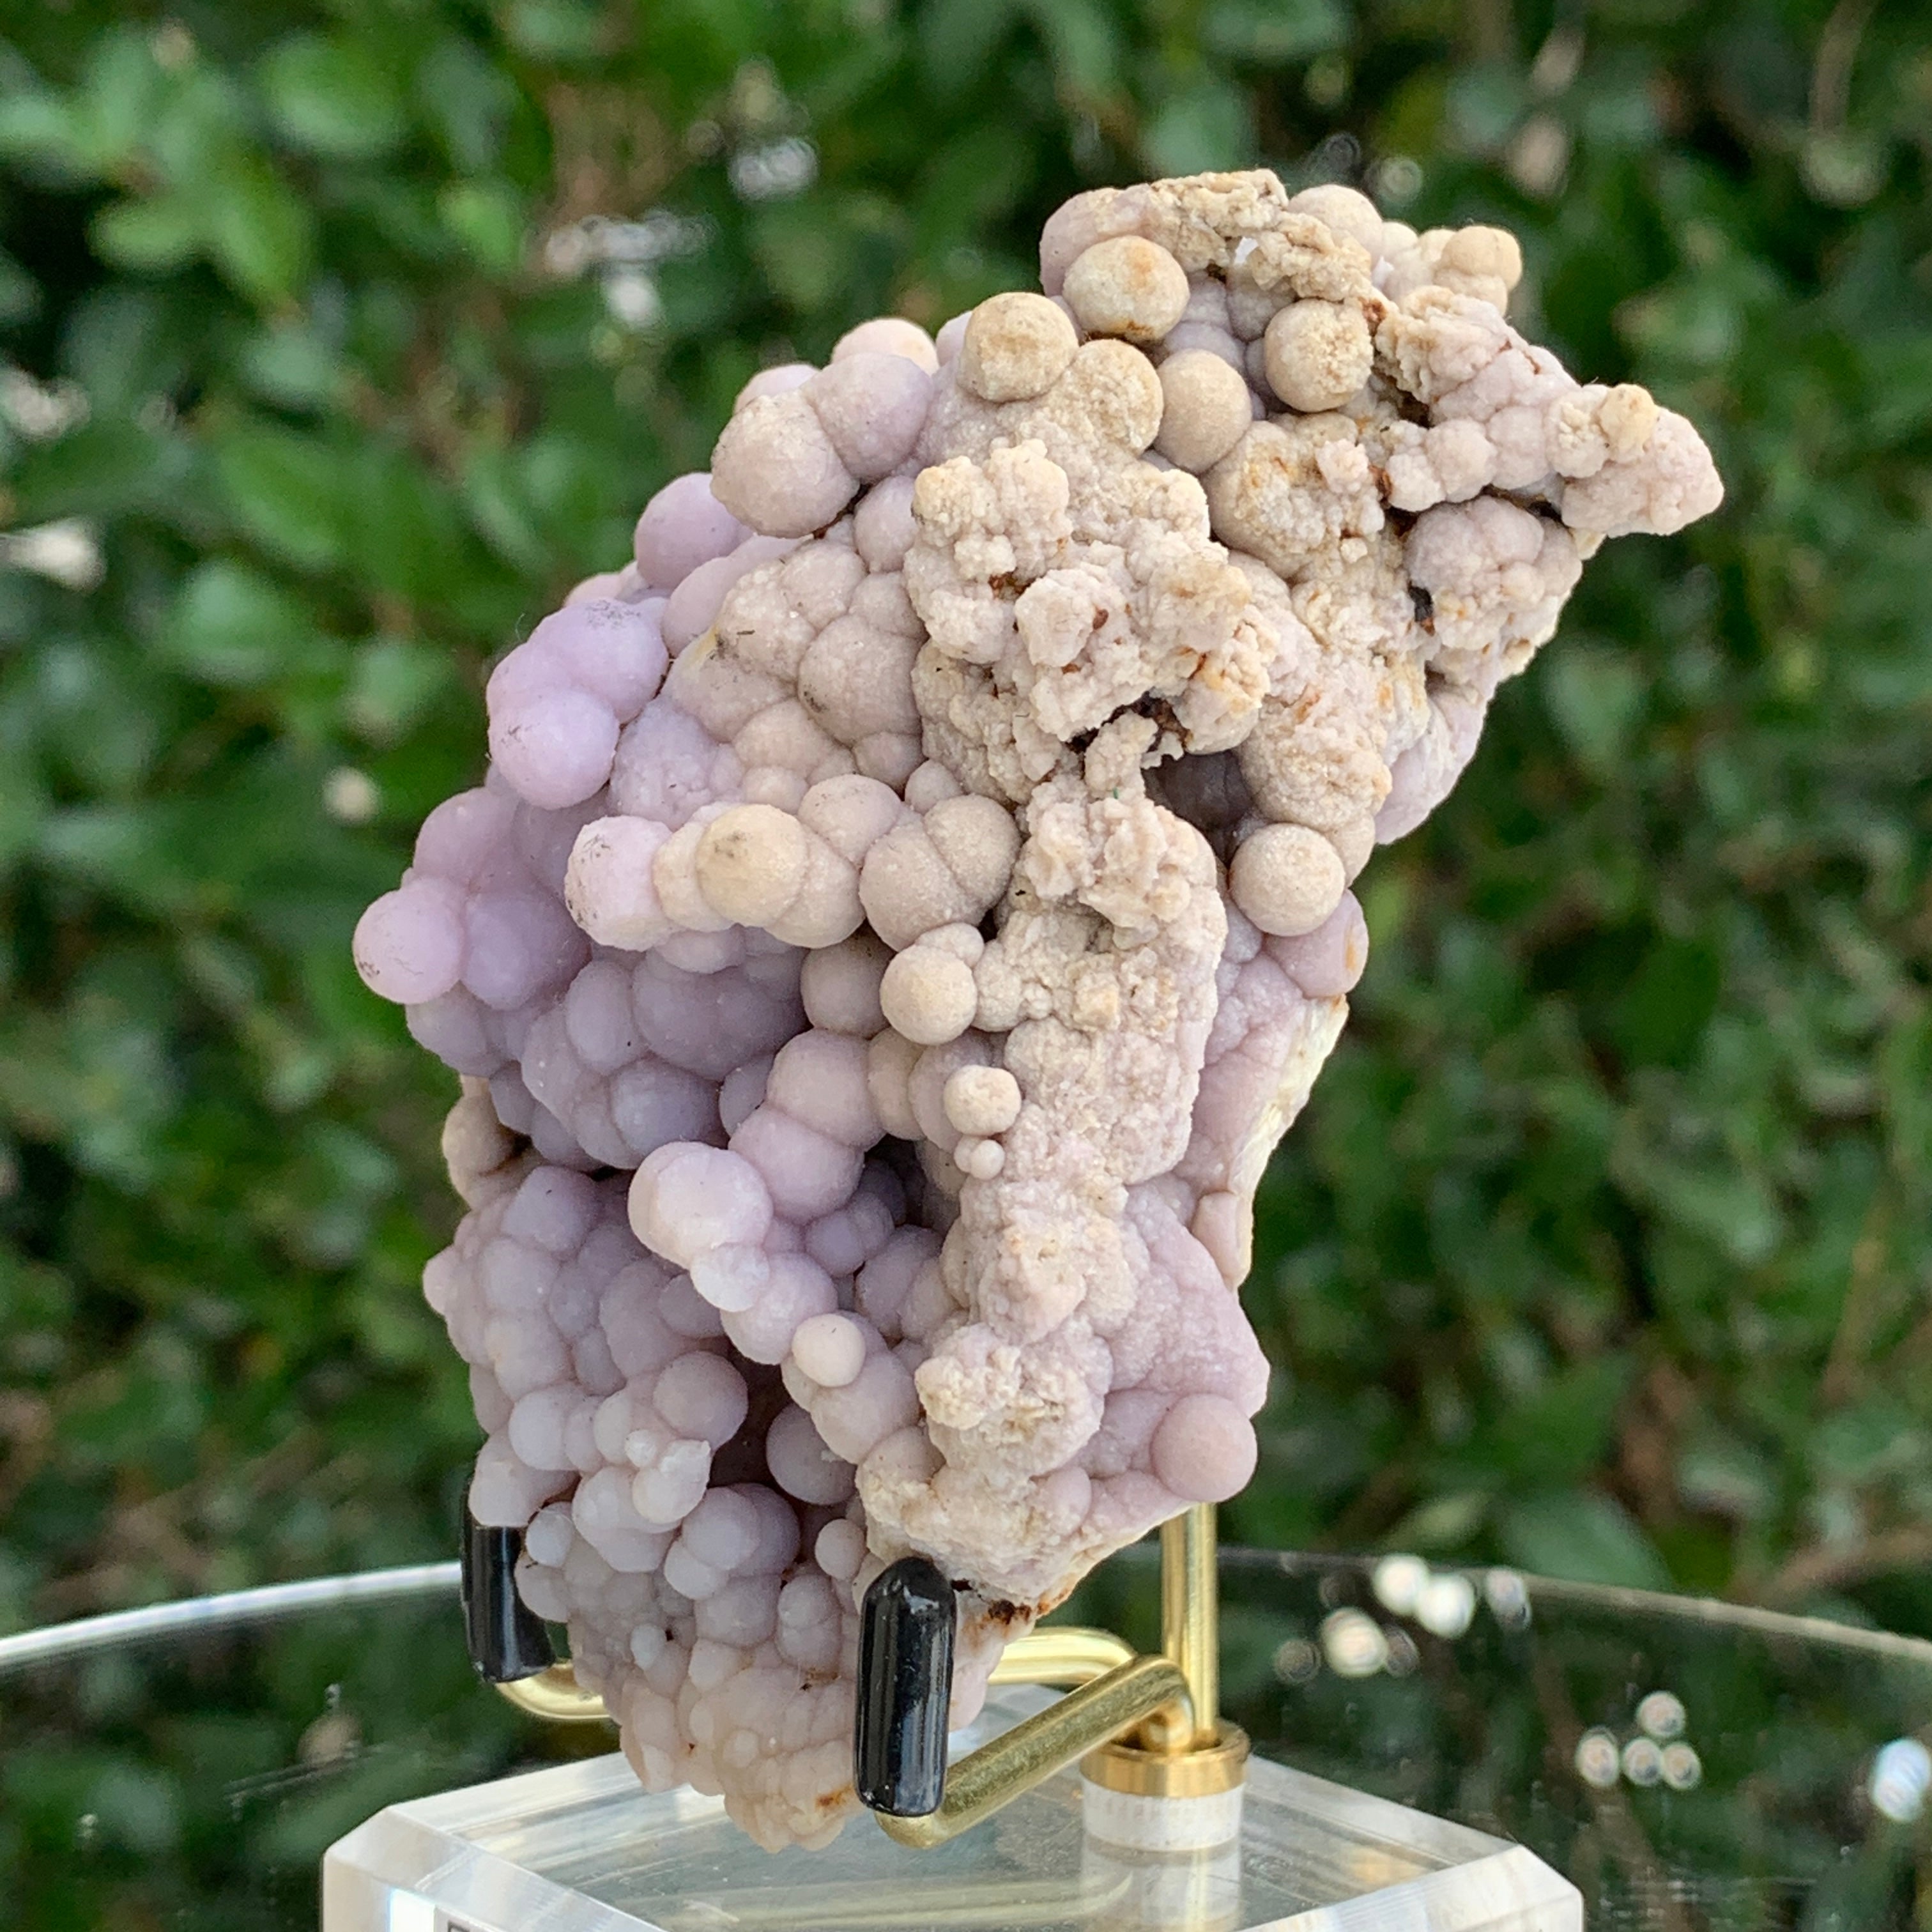 177g 8x6x4cm Purple Grape Agate Chalcedony from Indonesia